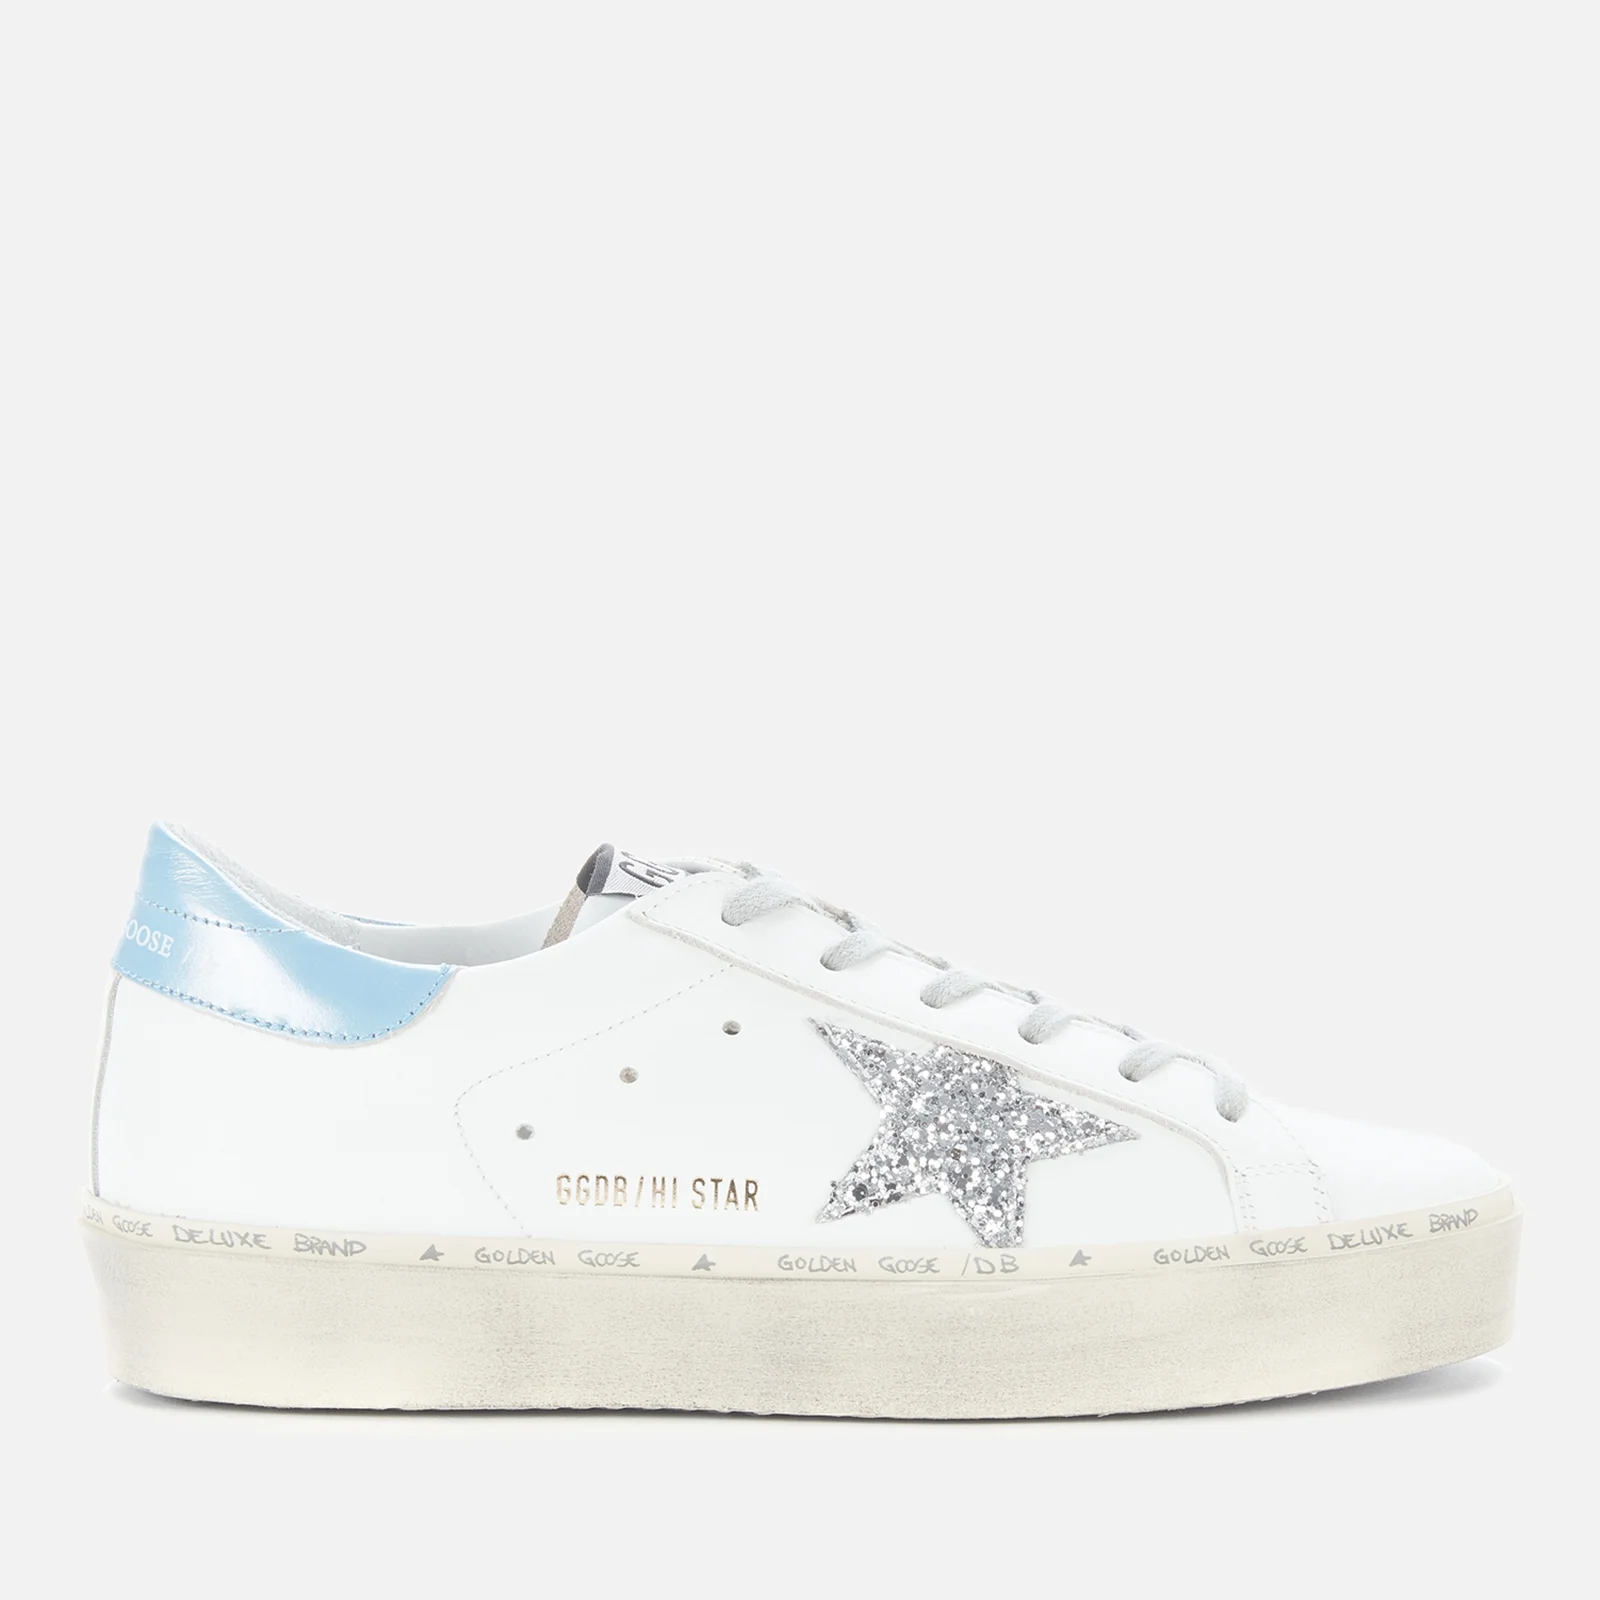 Golden Goose Women's Hi Star Leather Flatform Trainers - White/Silver/Sky Image 1